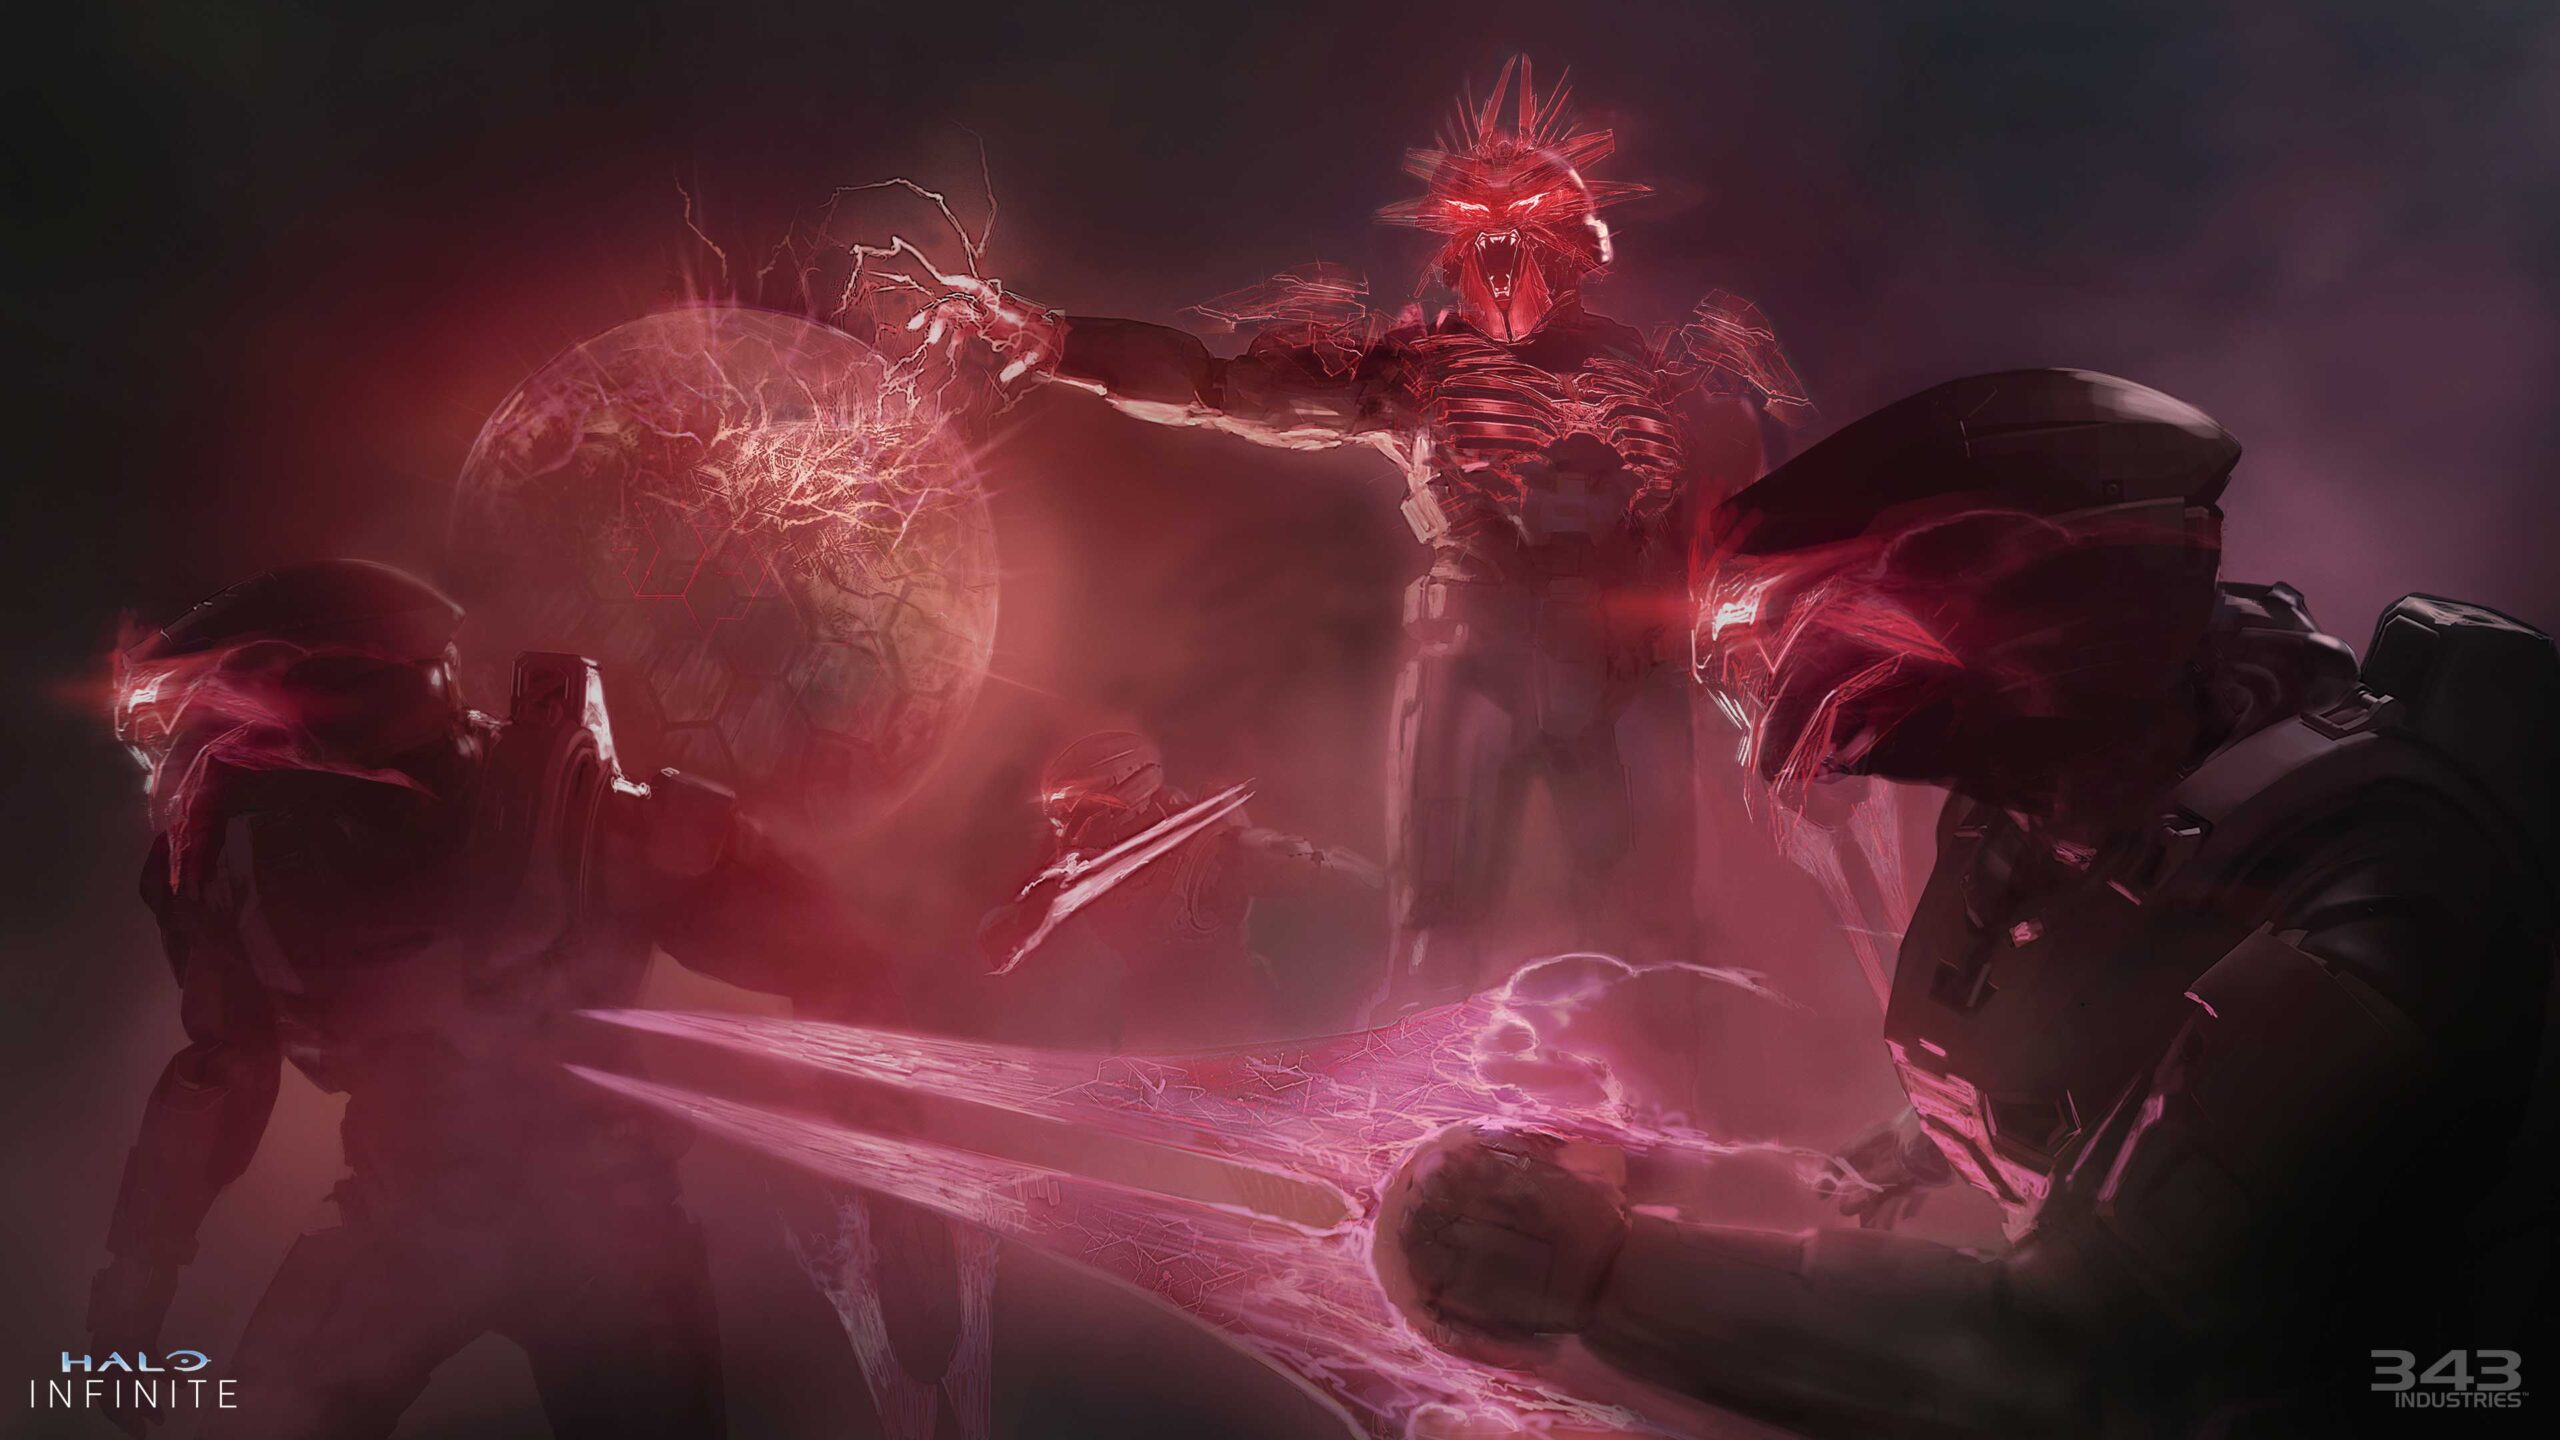 Halo Infinite concept art for the Infection mode showing three Spartans infected by Iratus